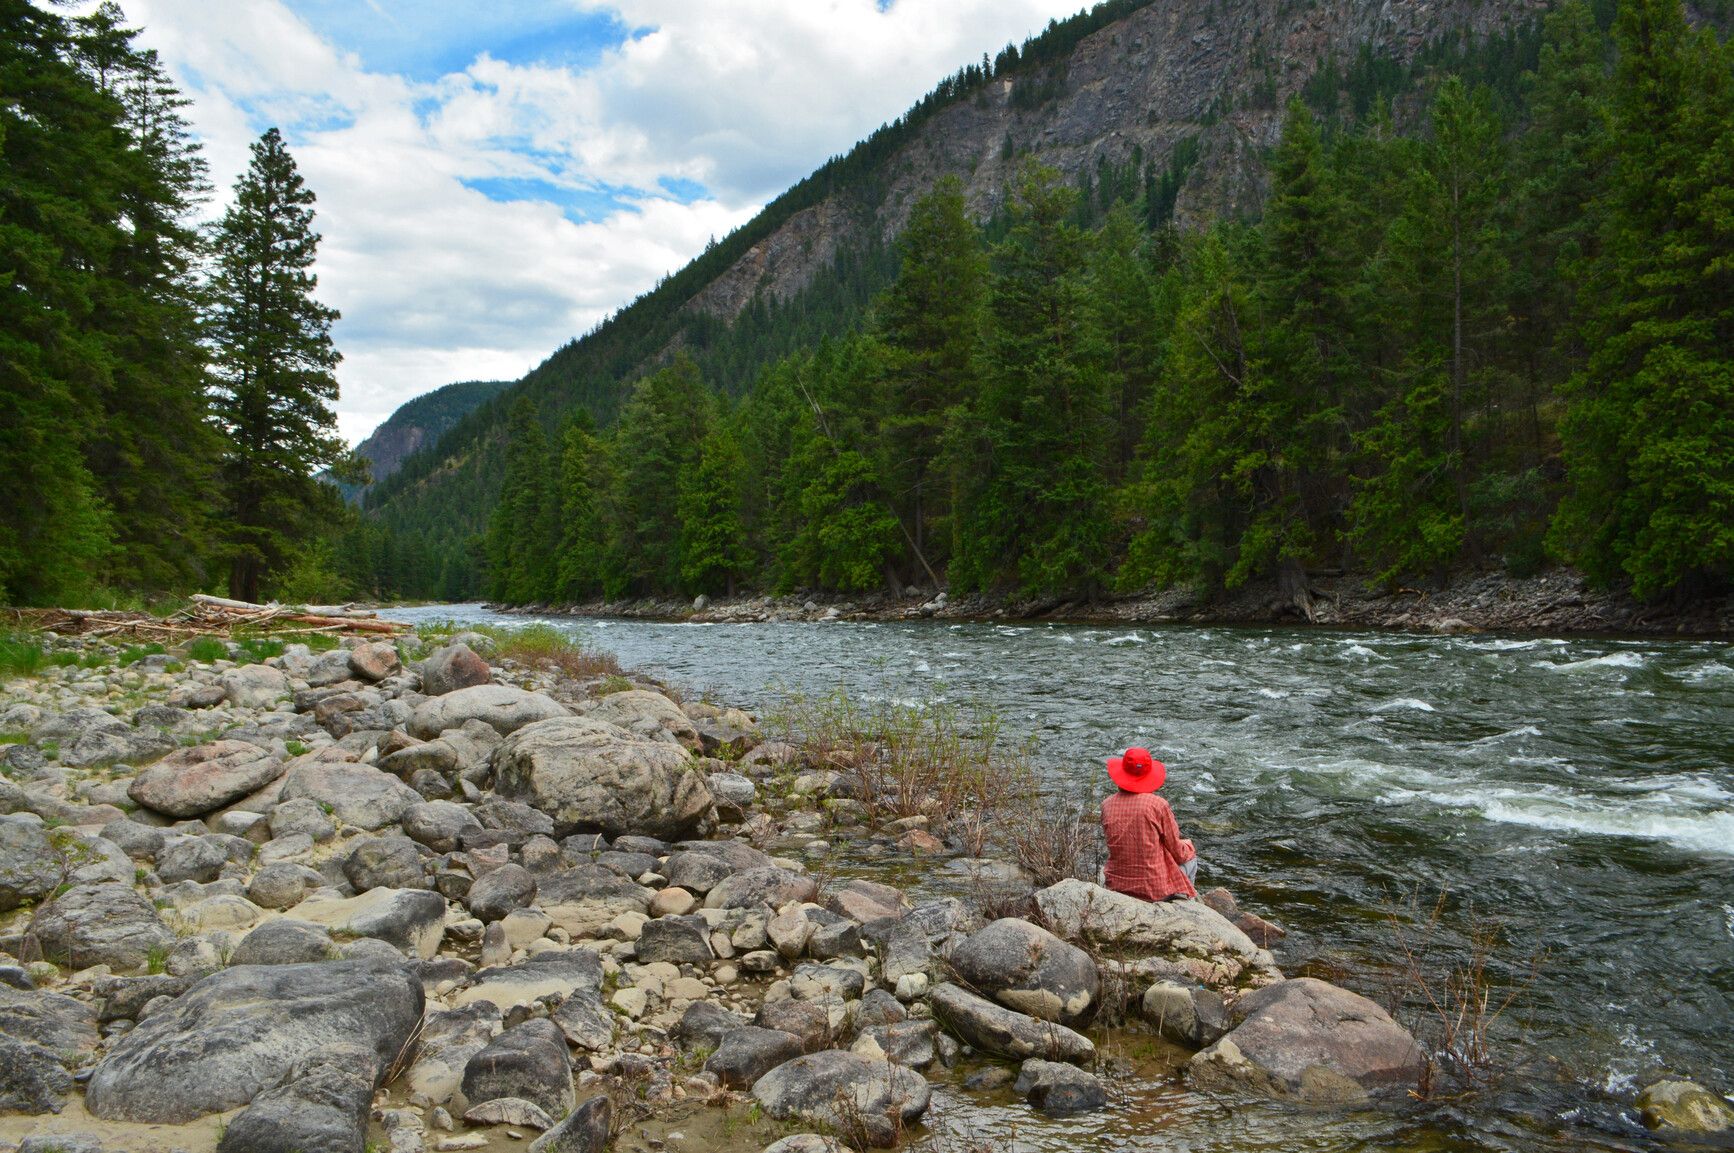 Listen to the roaring water of the Similkameen River in Stemwinder Park.